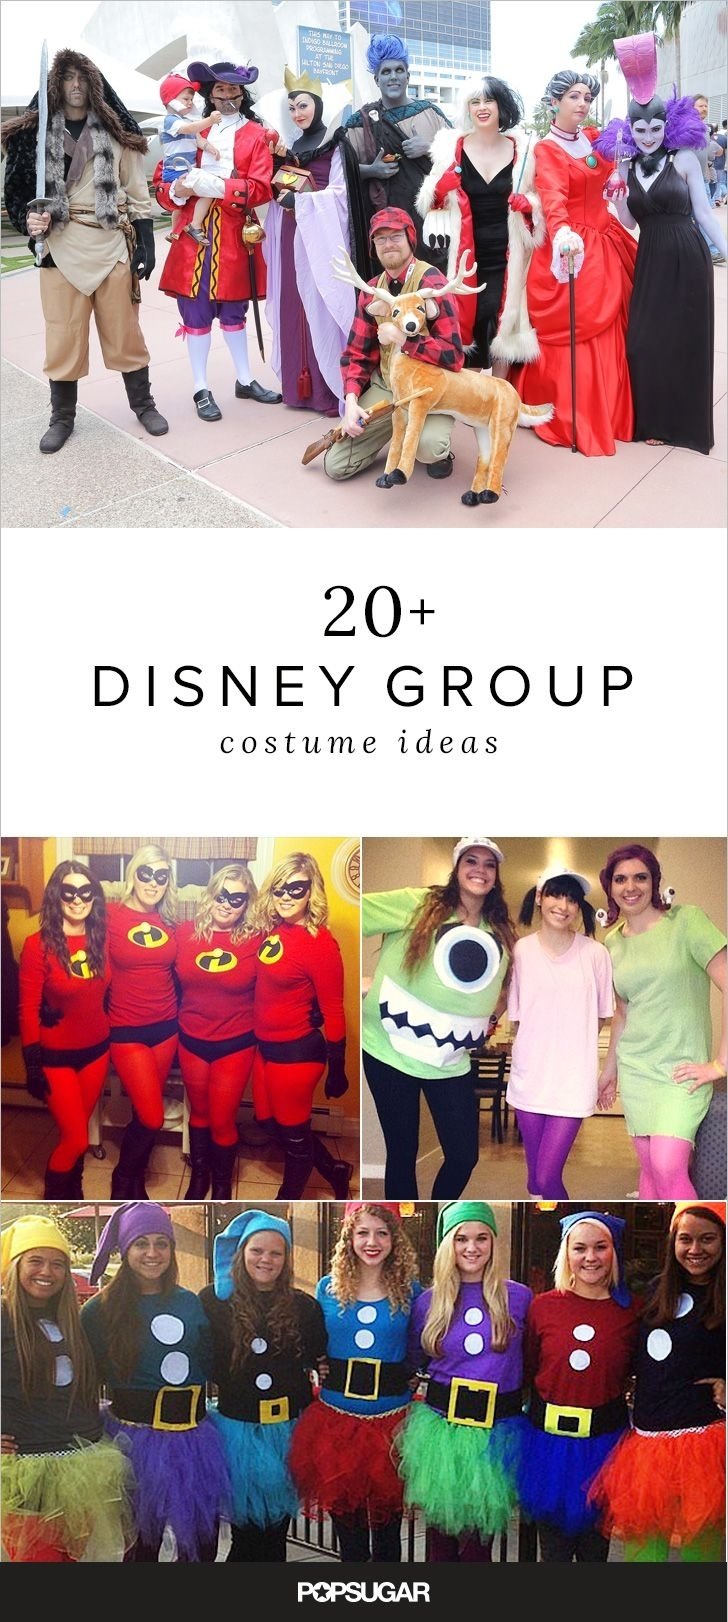 10 Most Recommended Large Group Halloween Costume Ideas 23 group disney costume ideas for your squad big group costumes 2022